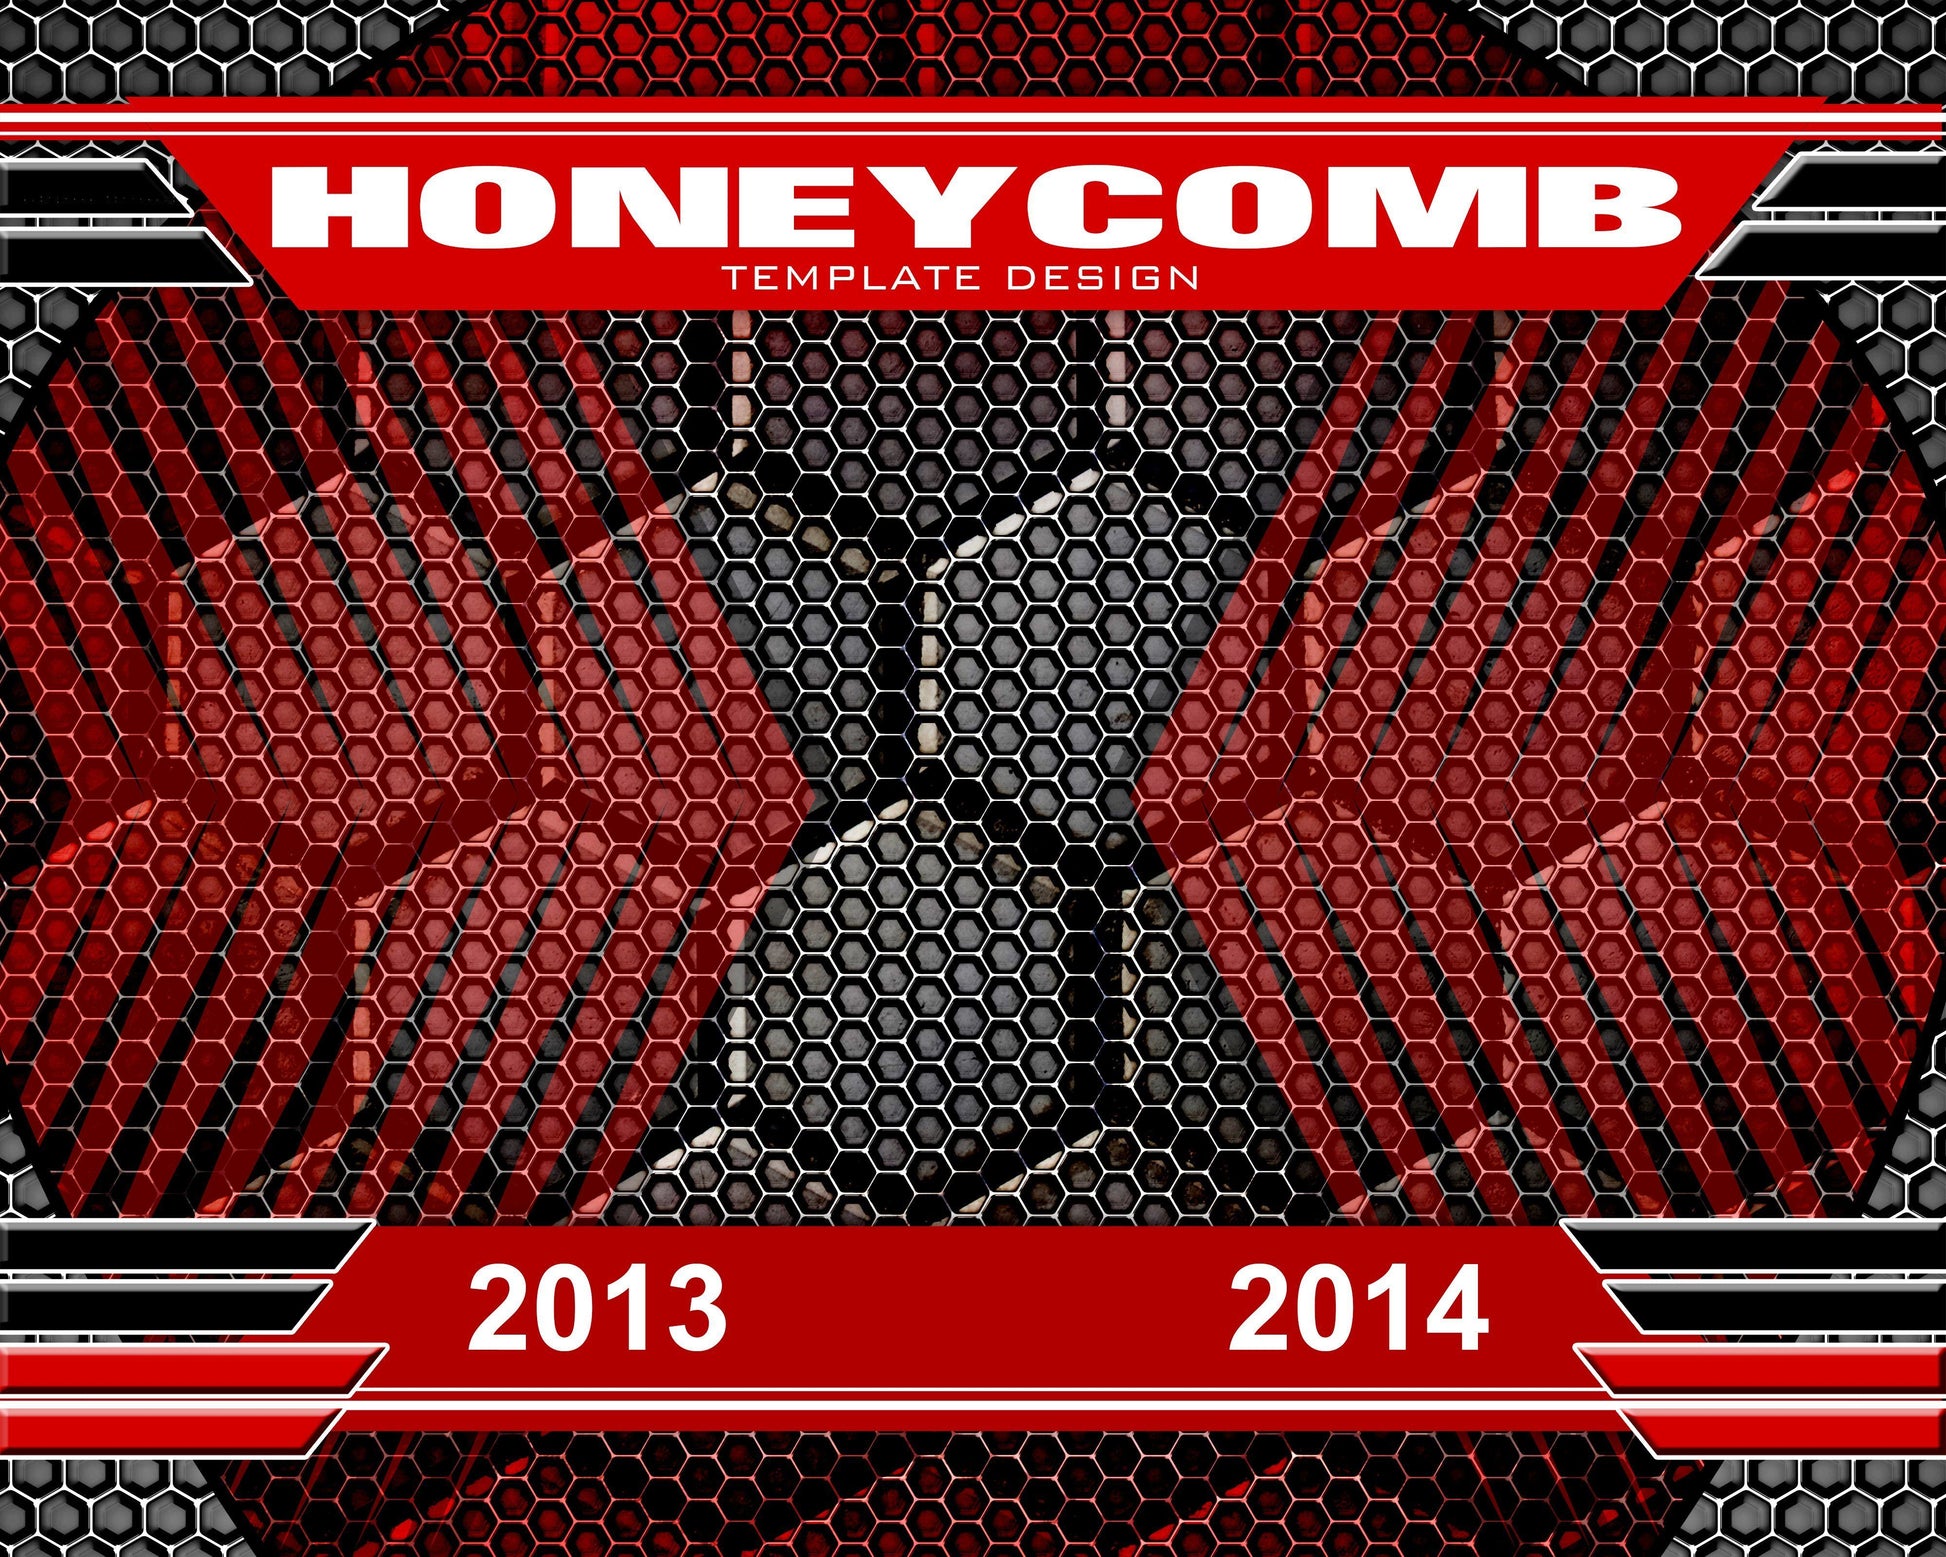 Honeycomb v.1 - Xtreme Team-Photoshop Template - Photo Solutions